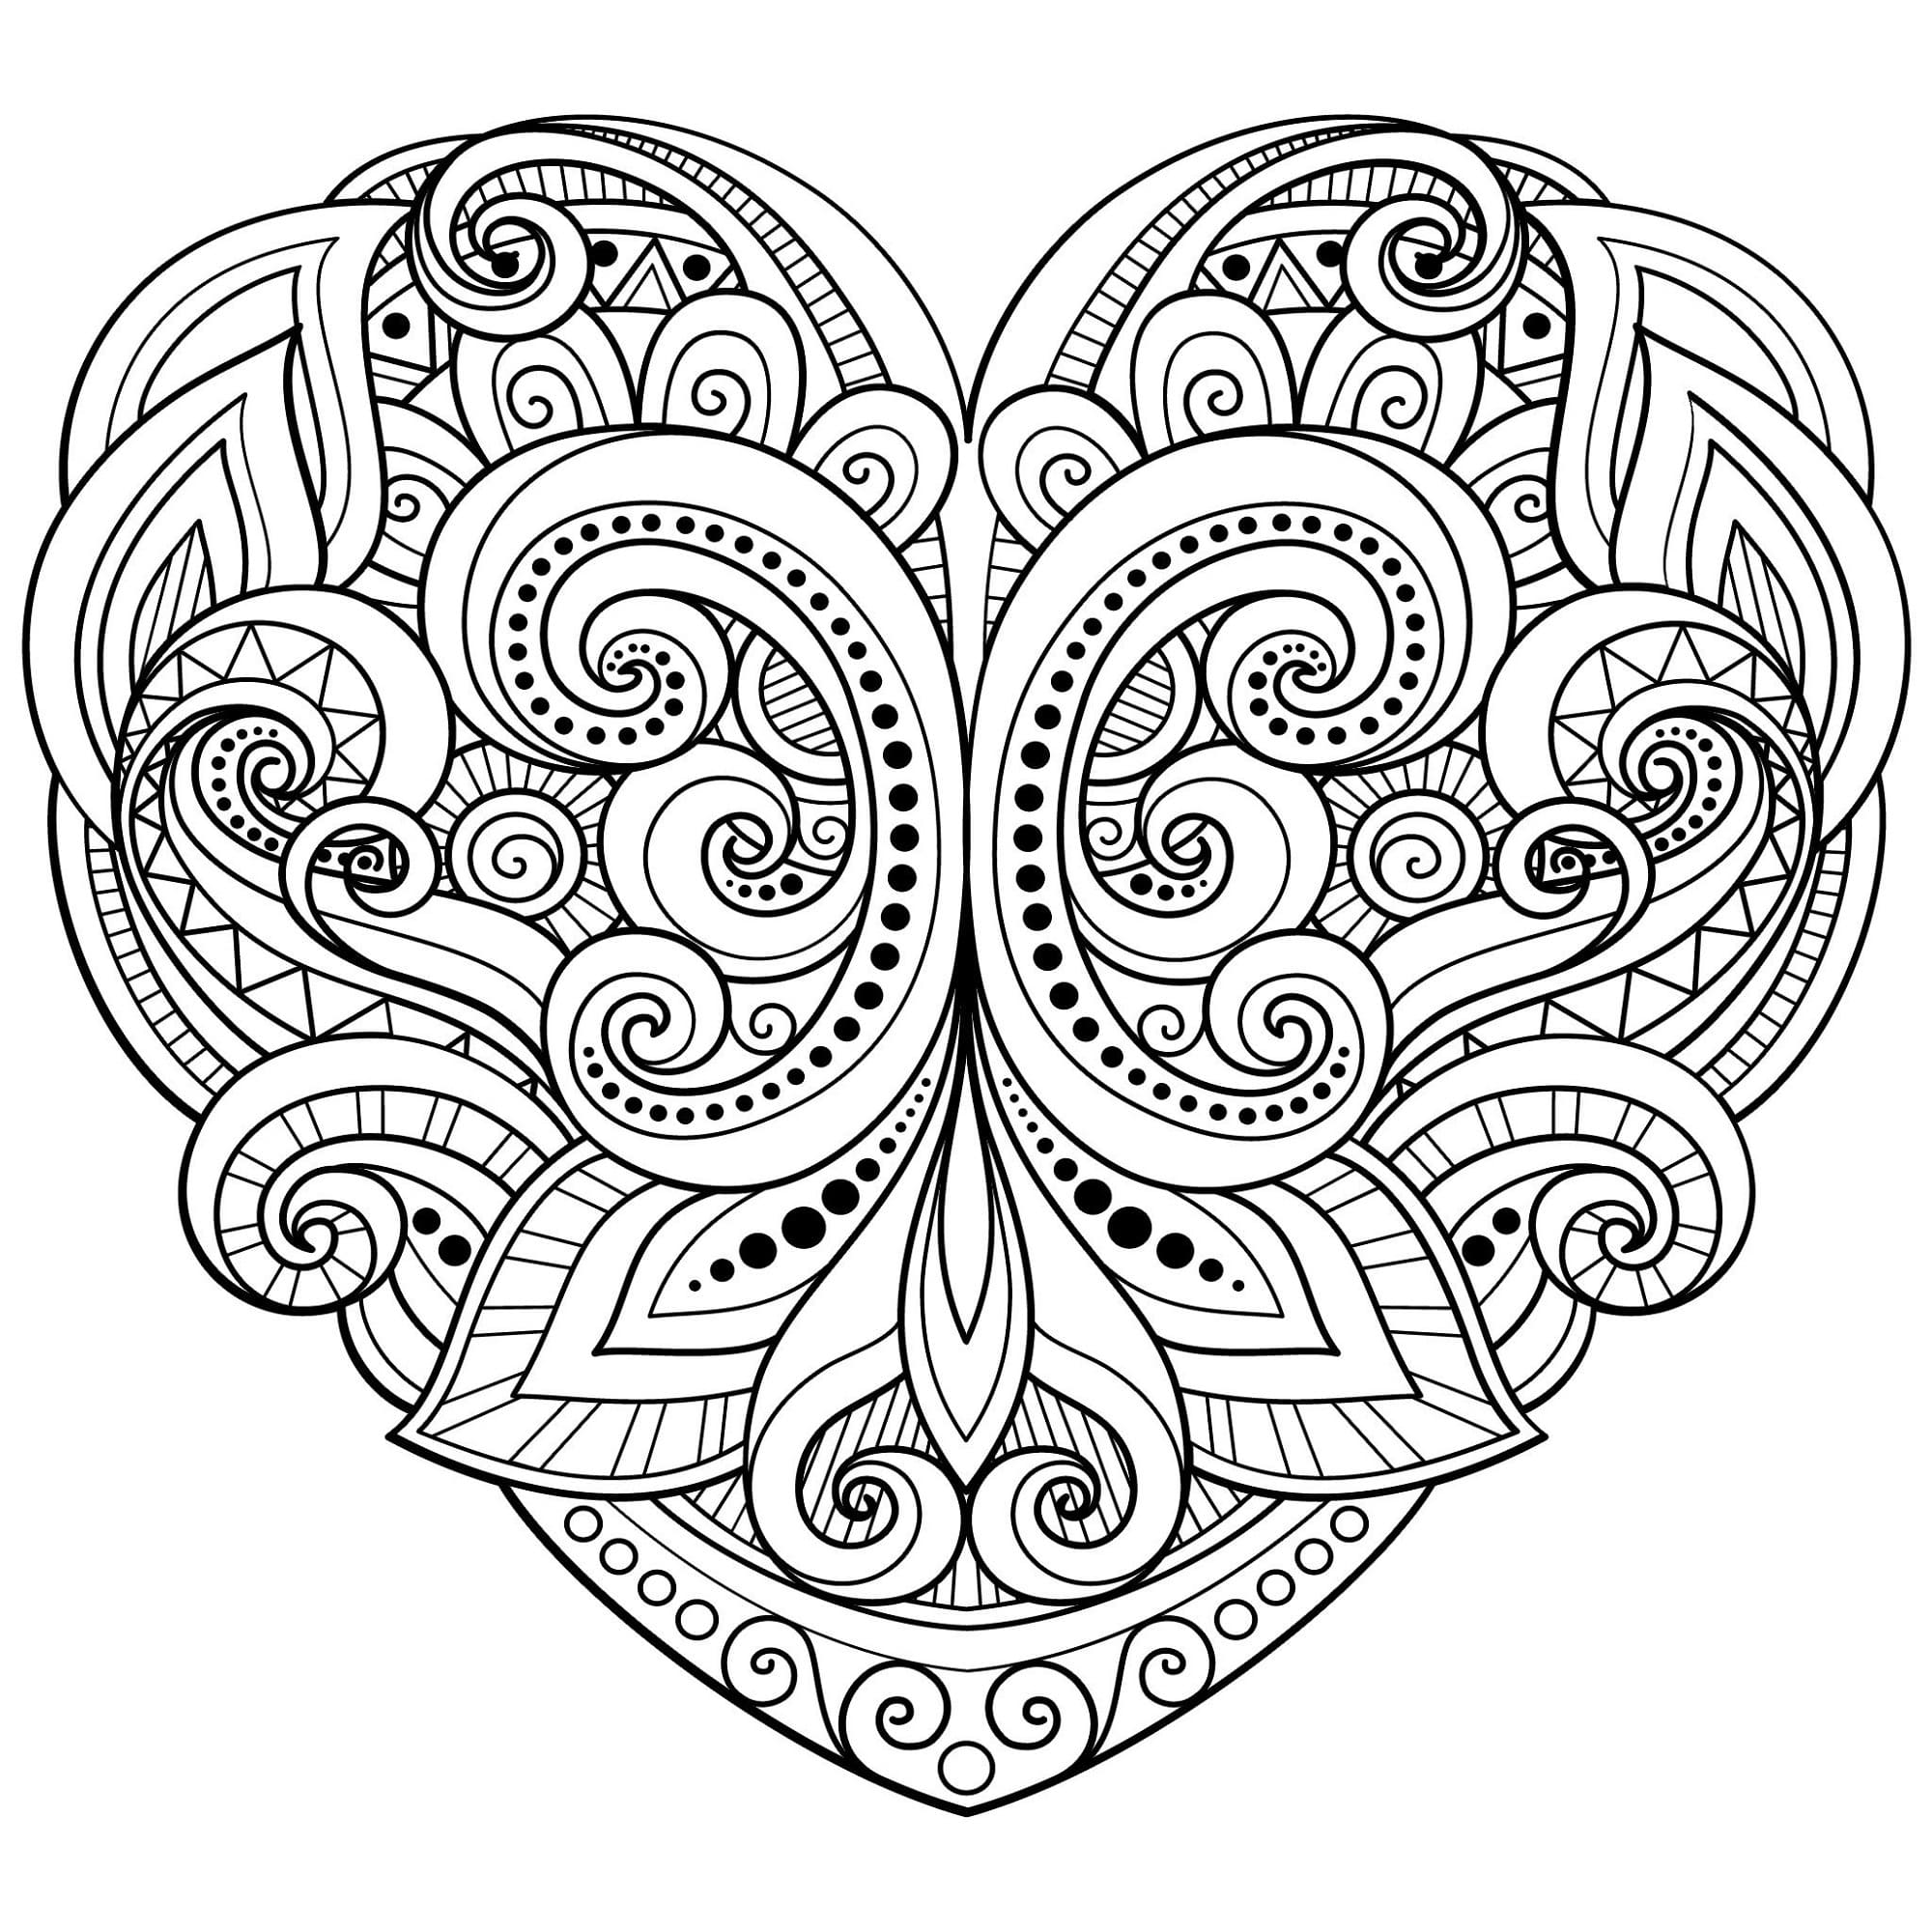 Mandala Coloring Pages 100 Pictures Free Printable.